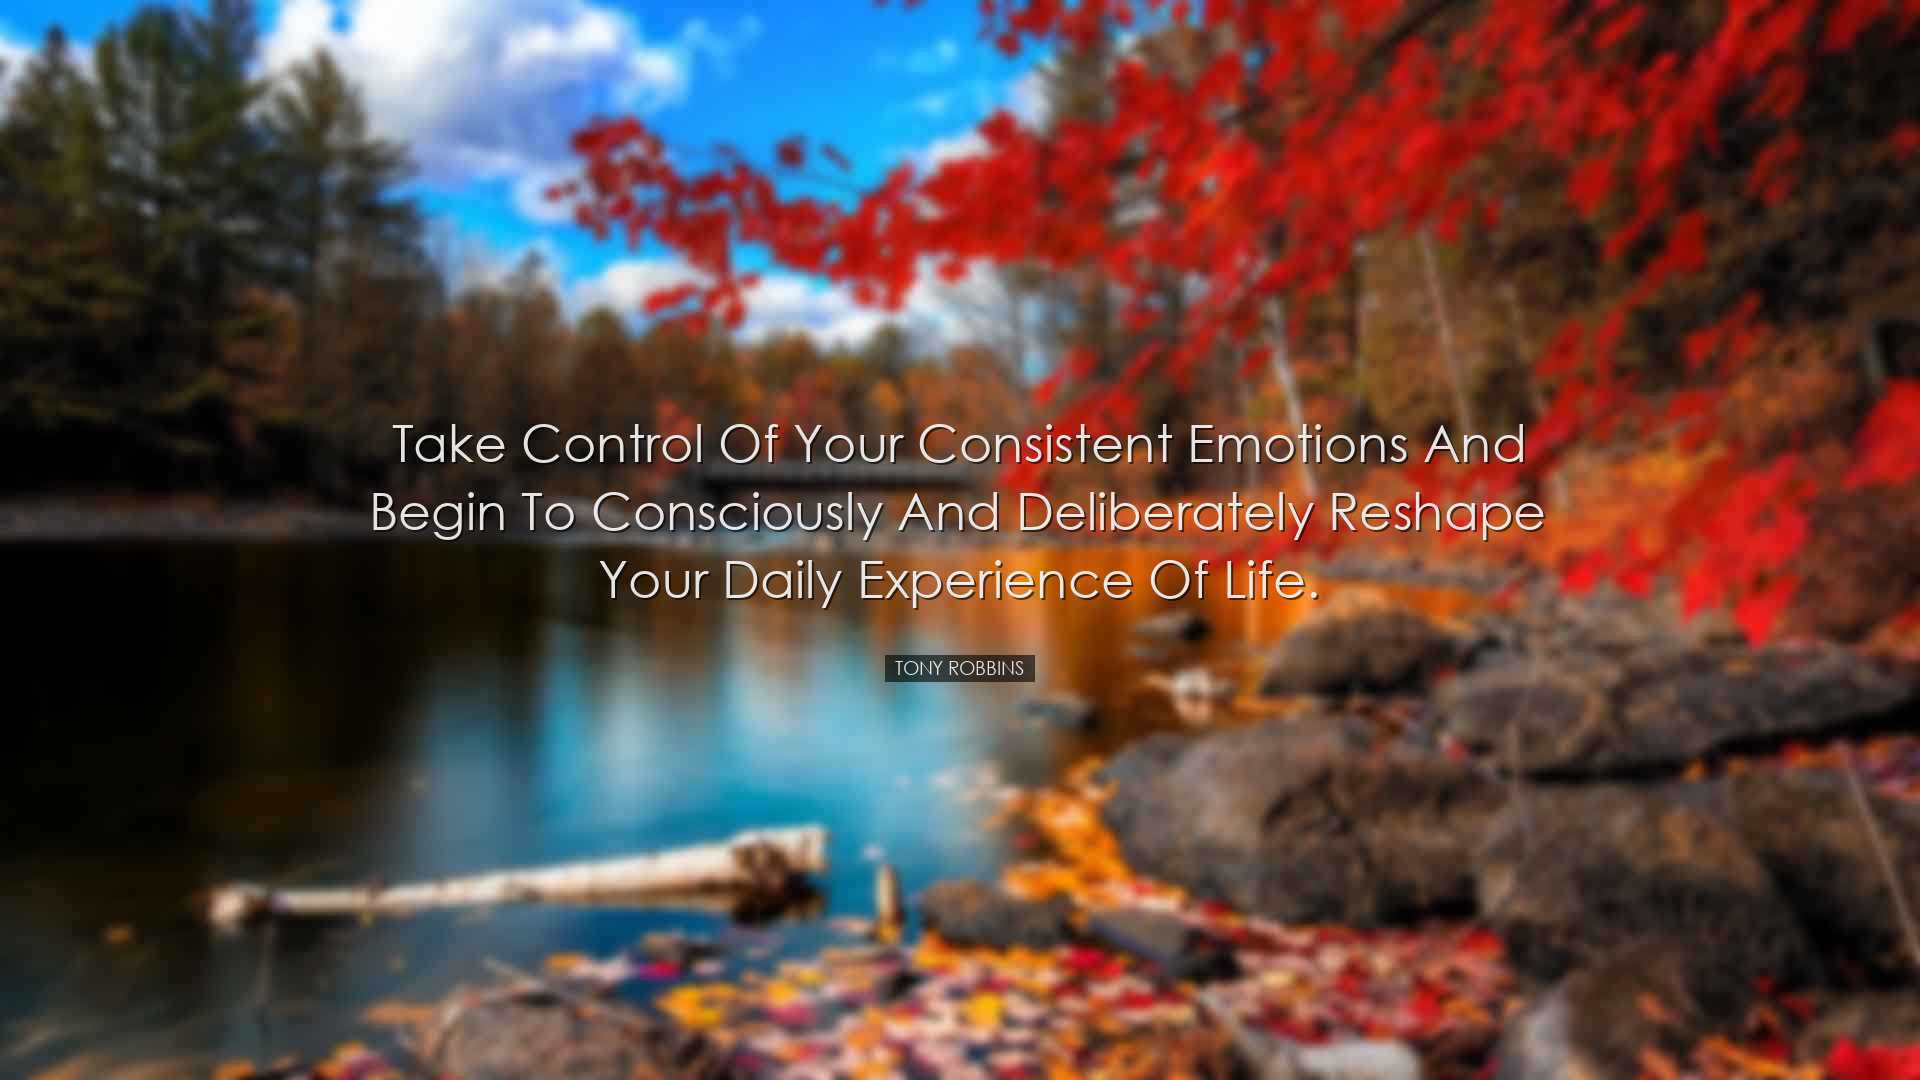 Take control of your consistent emotions and begin to consciously